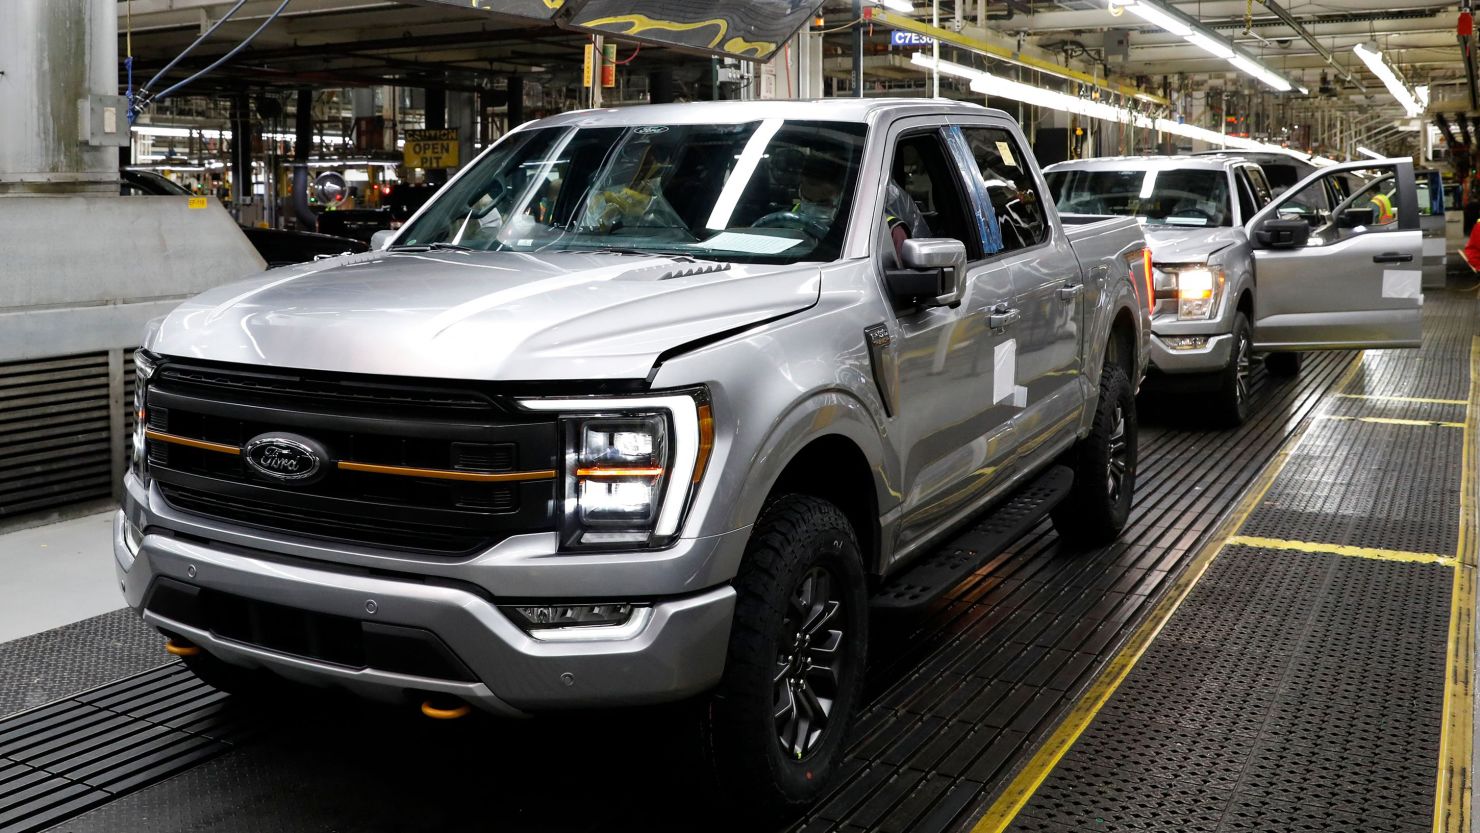 The 40 millionth Ford Motor Co. F-Series truck moves along the assembly line at the Ford Dearborn Truck Plant on January 26, 2022 in Dearborn, Michigan. - The 40 millionth is a F-150, Tremor model in Iconic Silver and will be delivered to a customer in Texas.